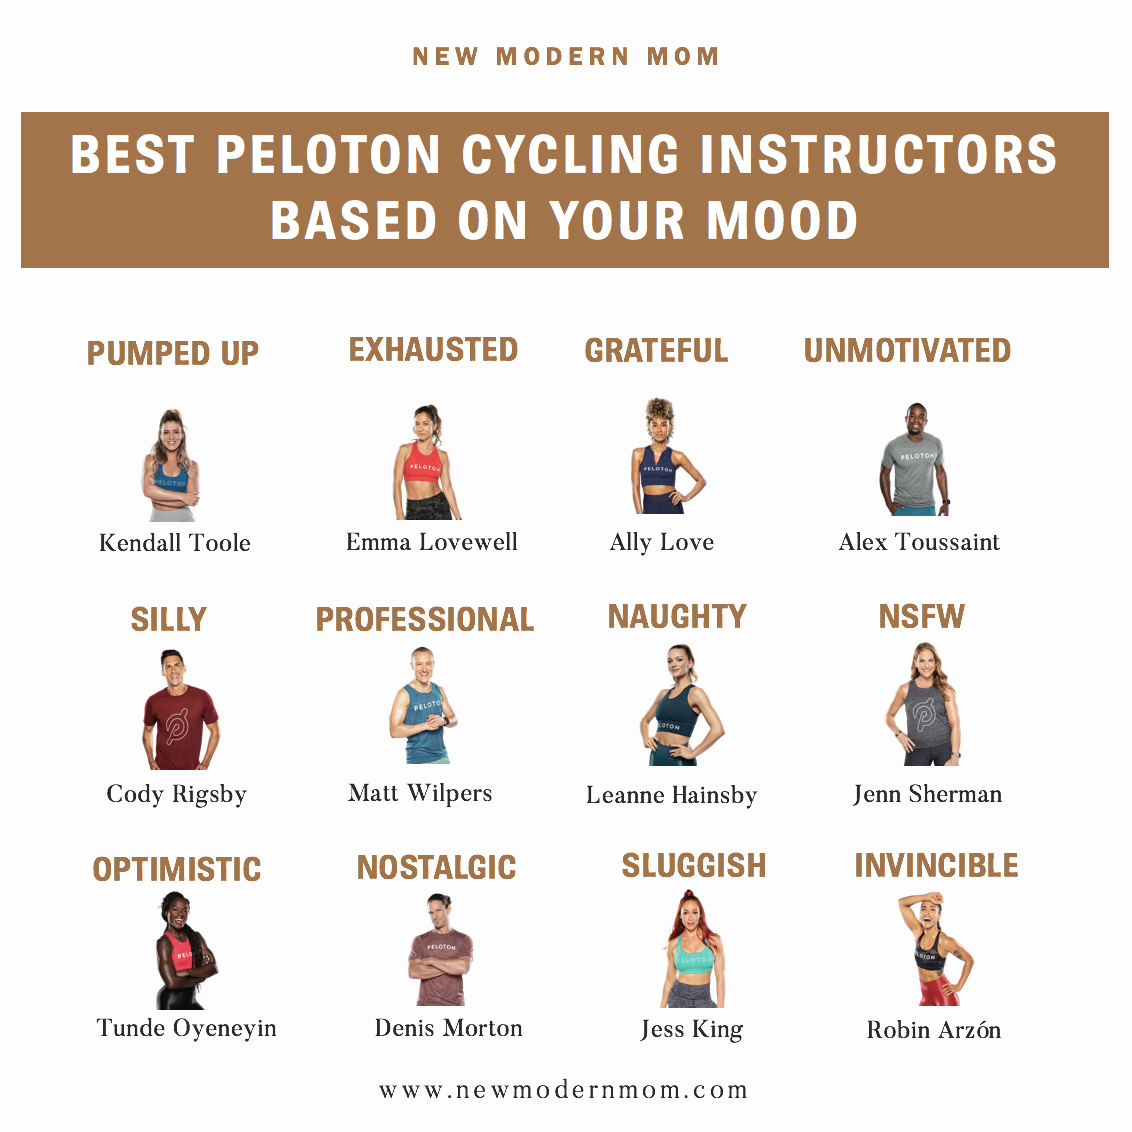 List: The Best Peloton Cycling Instructors Based On Your Mood by New Modern Mom